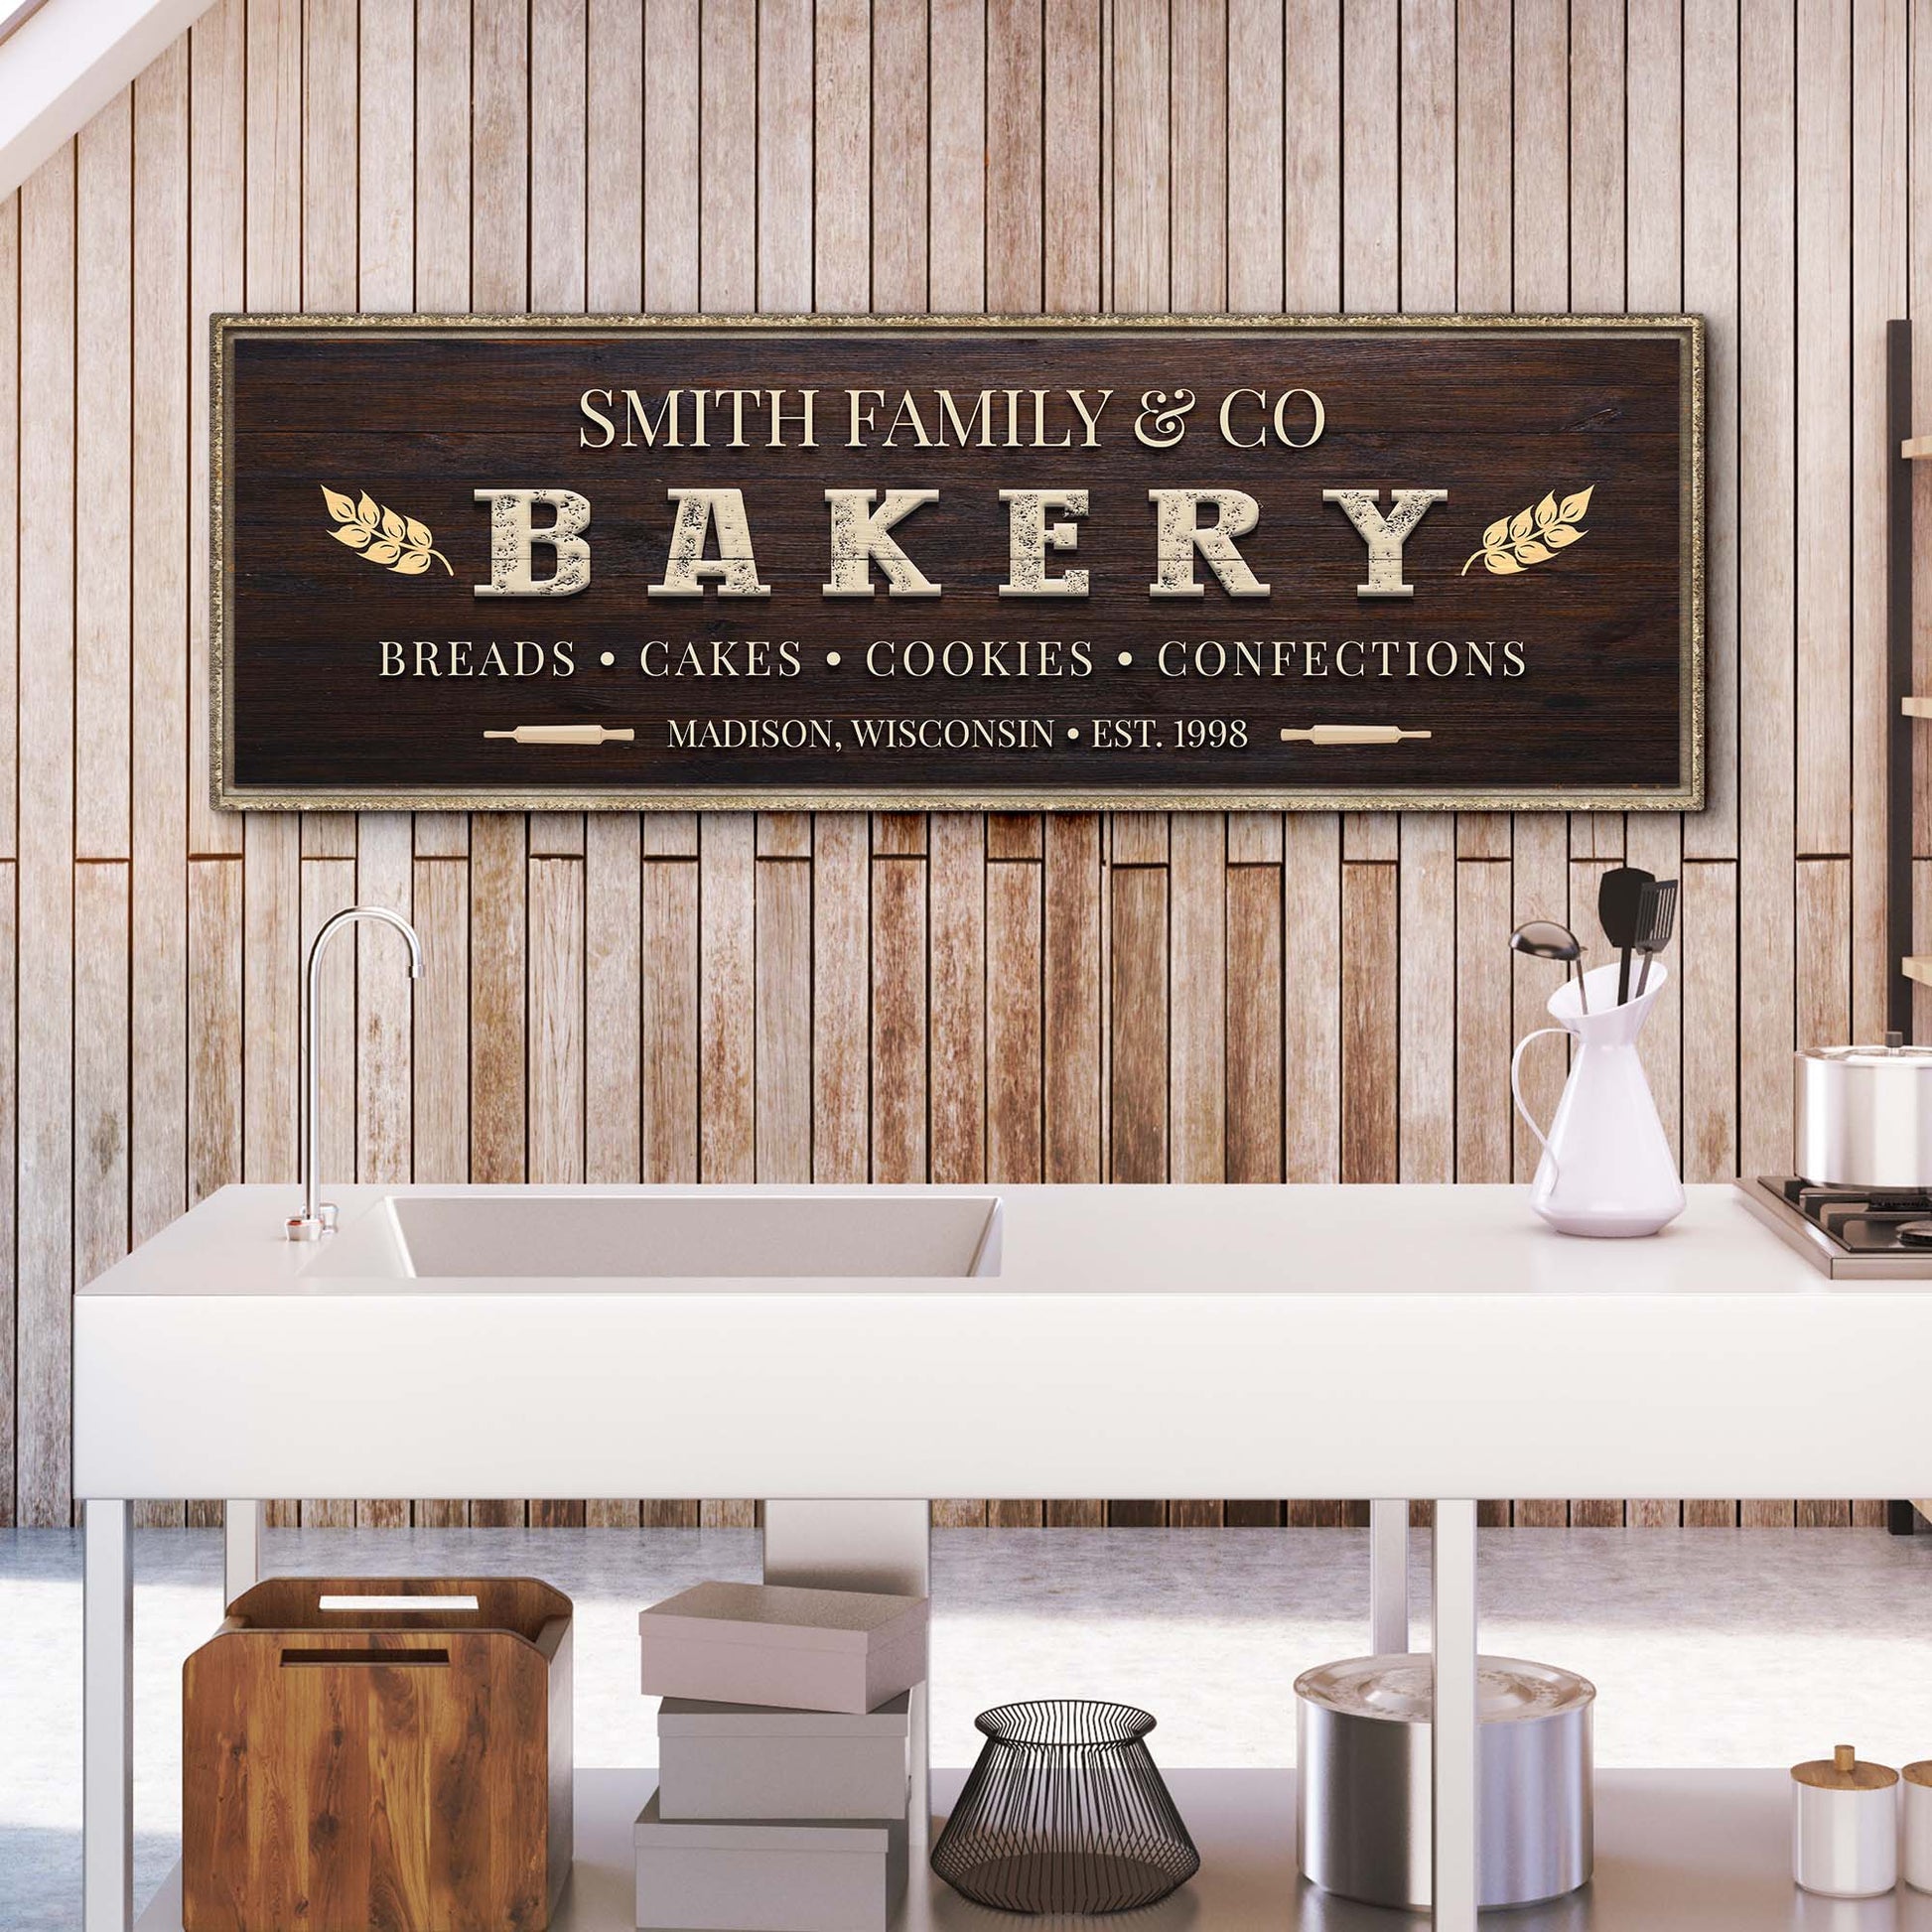 Breads, Cakes, Cookies, Confections Bakery Sign II - Image by Tailored Canvases